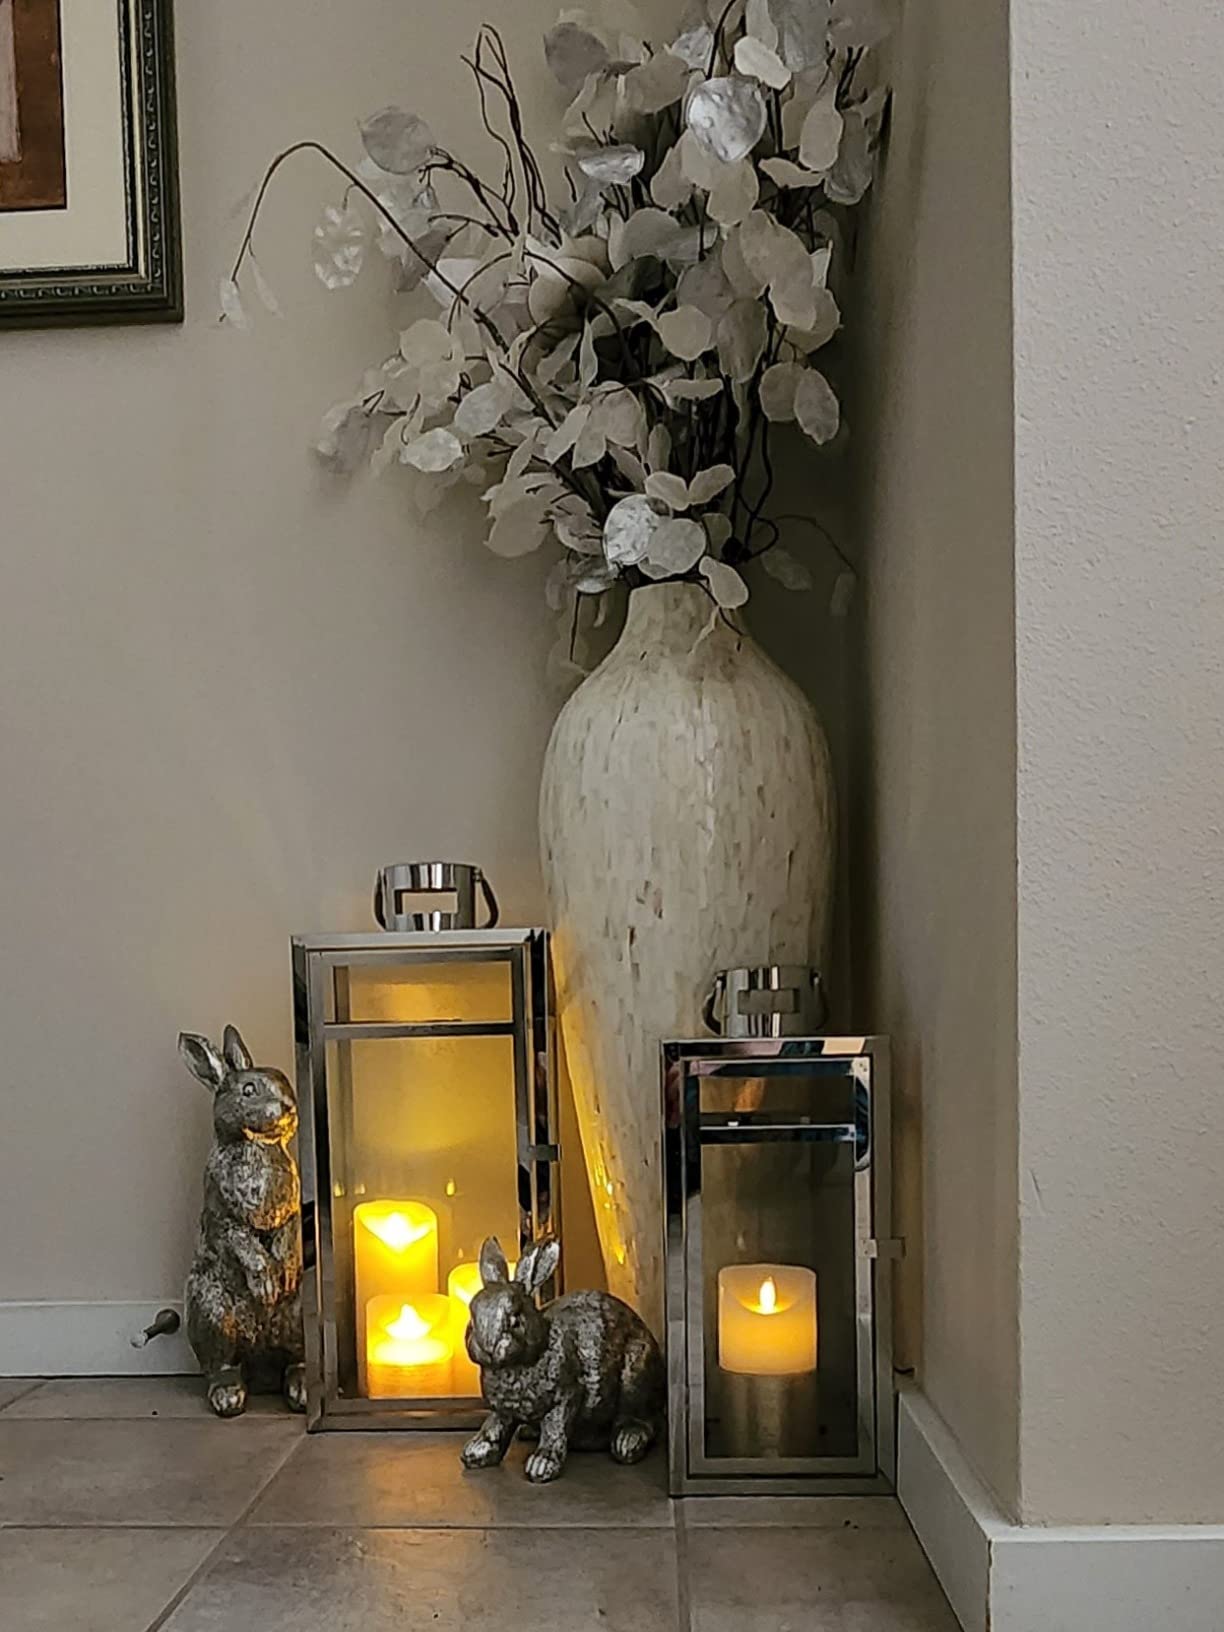 silver lamp warm LED candles silver rabbit figurines white big flower vase floor candle holders